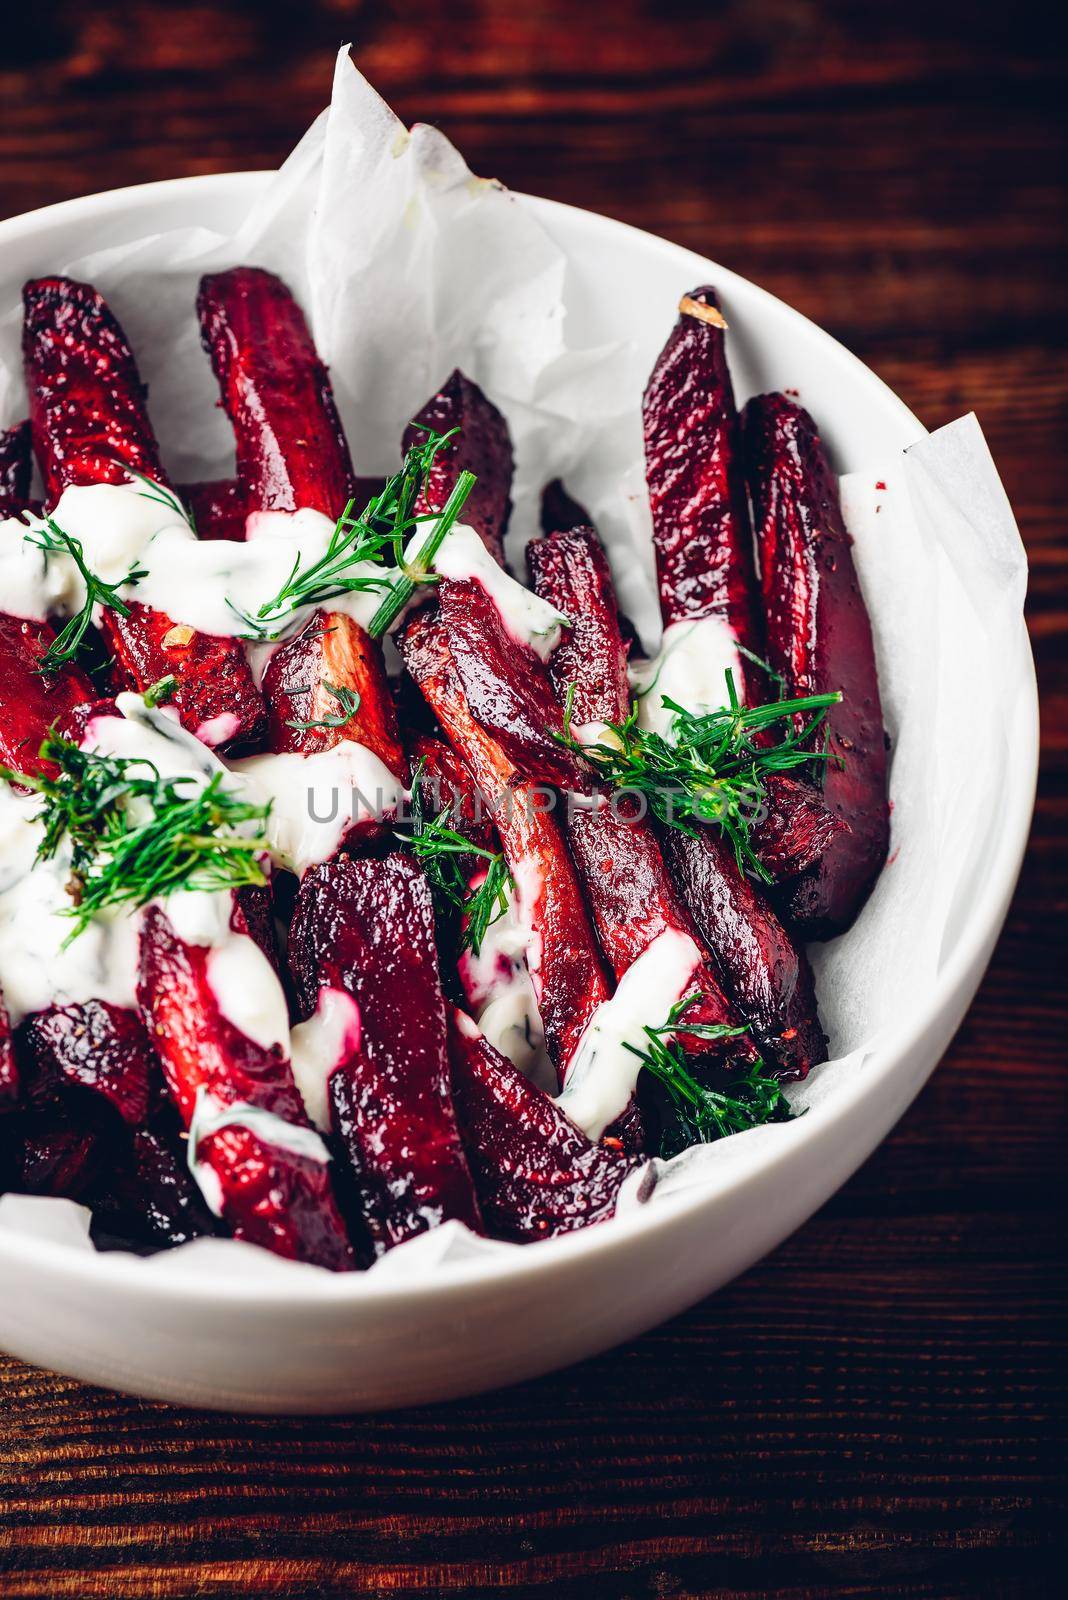 Baked beet with yogurt and dill by Seva_blsv